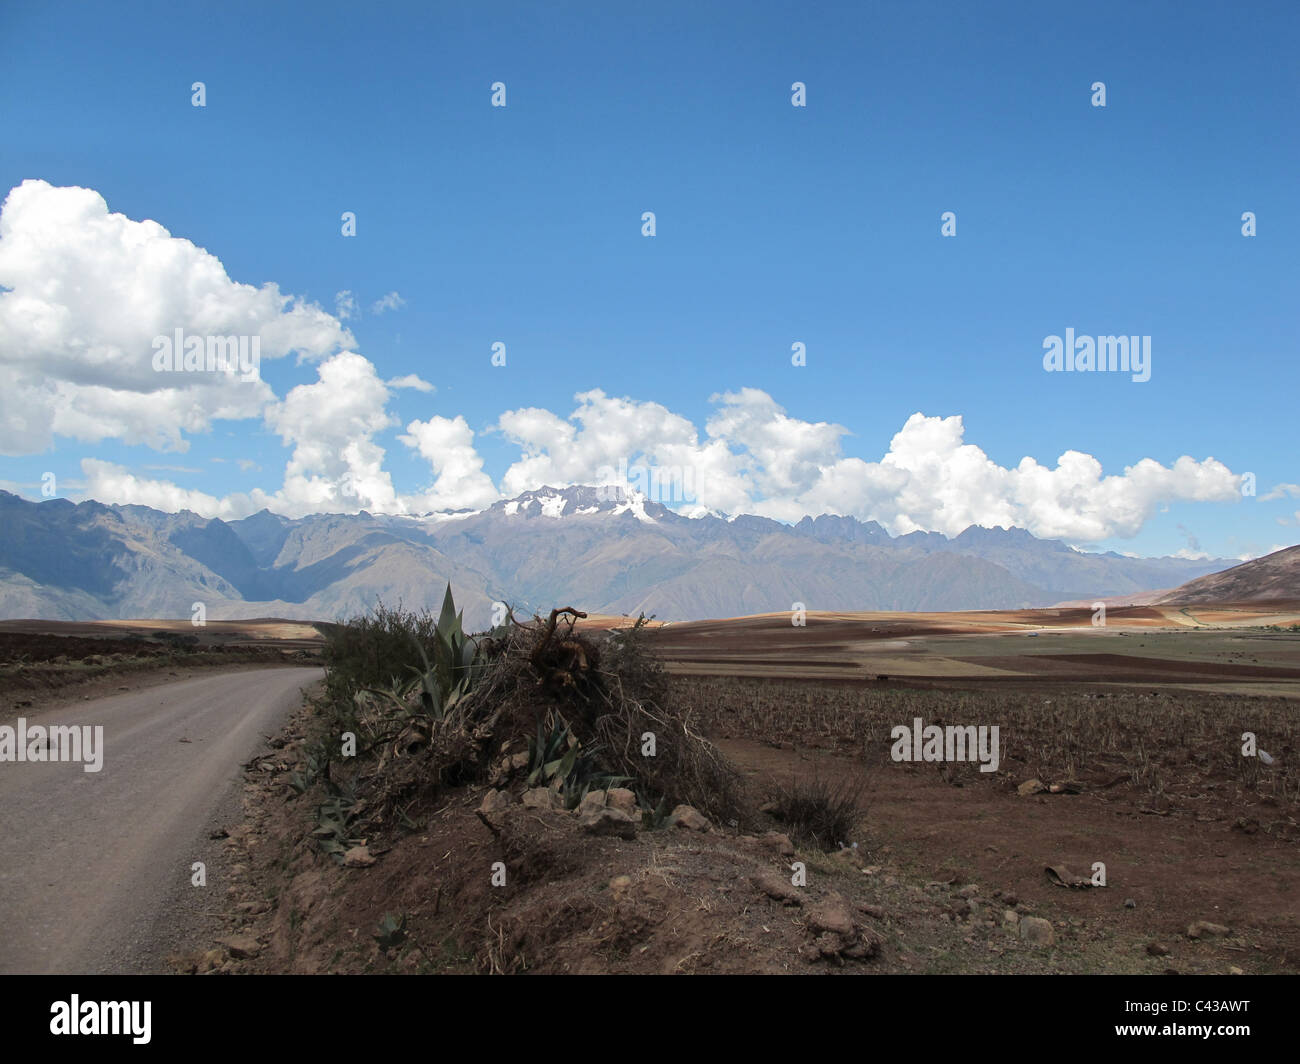 Road to village chinchero with farm fields both sides, Peru Stock Photo